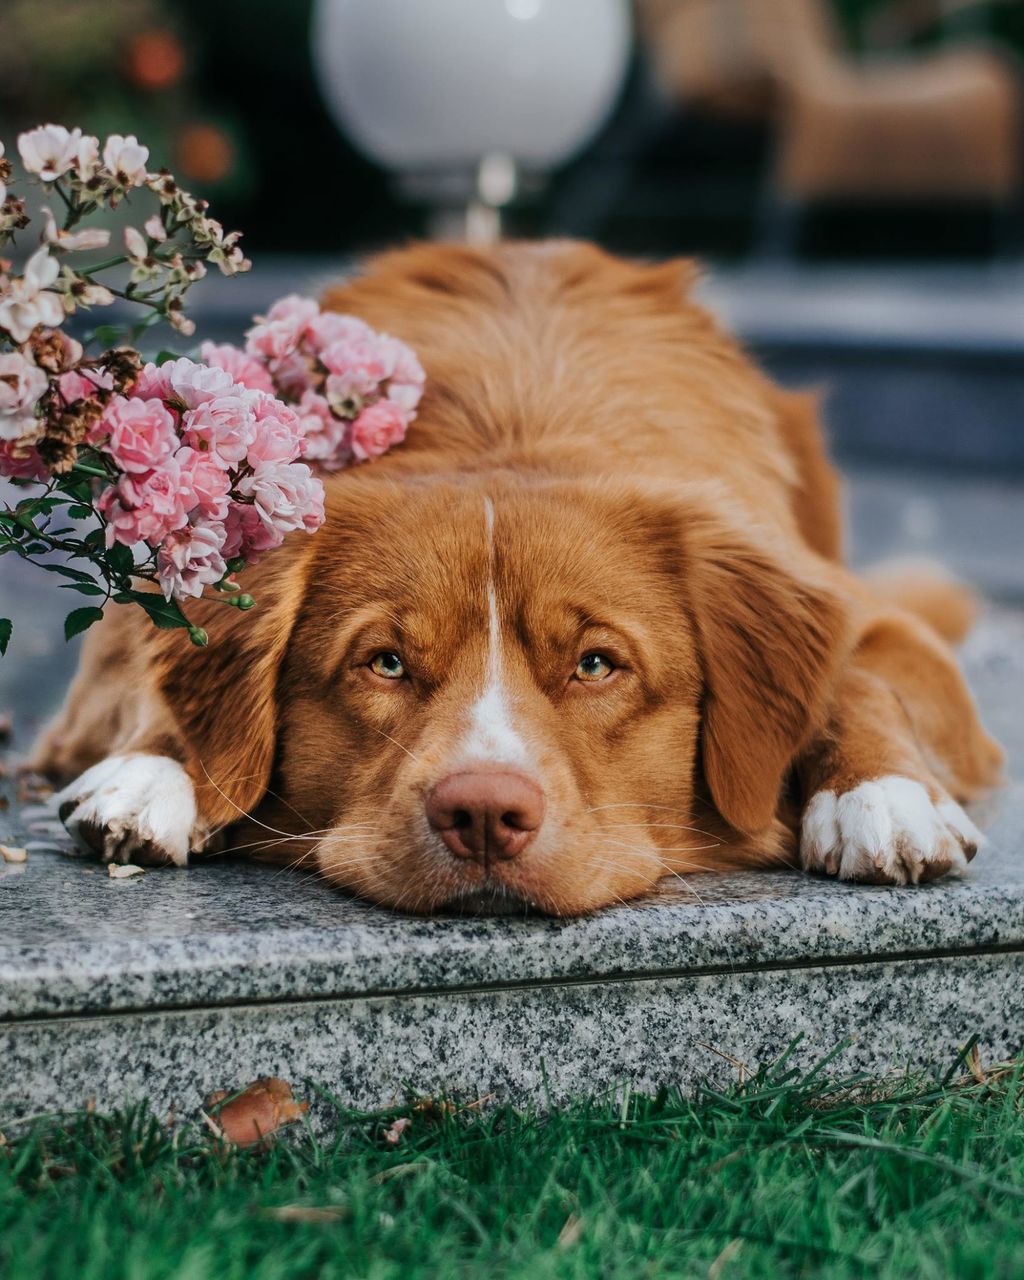 dog, pets, domestic, canine, domestic animals, one animal, mammal, animal themes, vertebrate, animal, portrait, flowering plant, relaxation, flower, brown, plant, no people, looking at camera, day, close-up, animal head